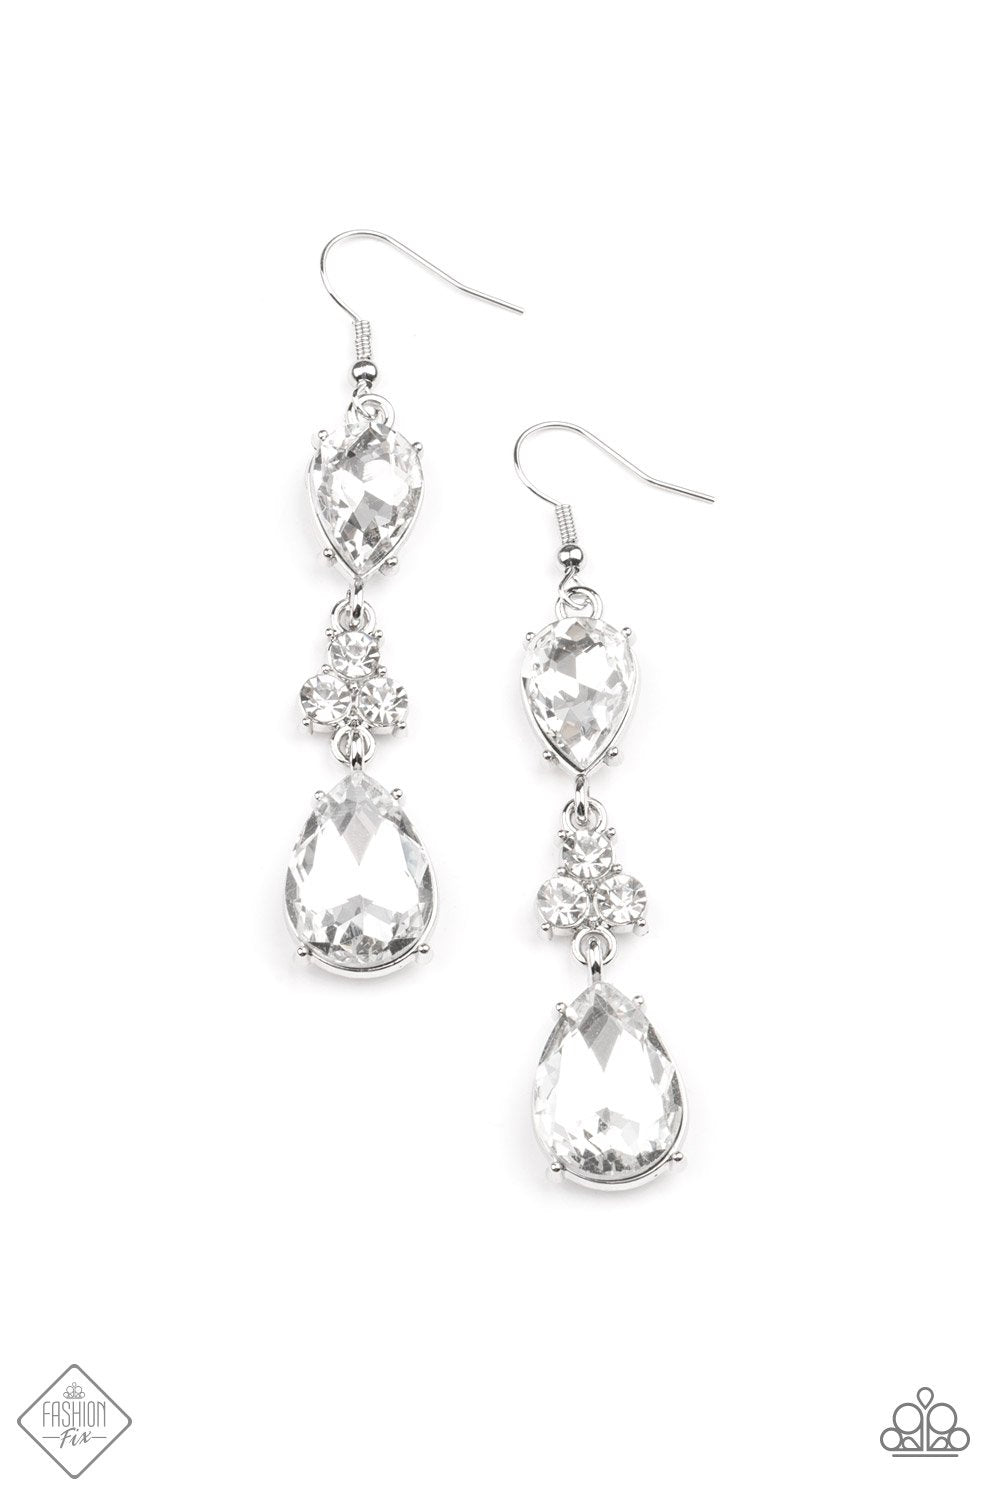 Paparazzi Once Upon a Twinkle White Fishhook Earrings - Fashion Fix Fiercely 5th Avenue May 2021